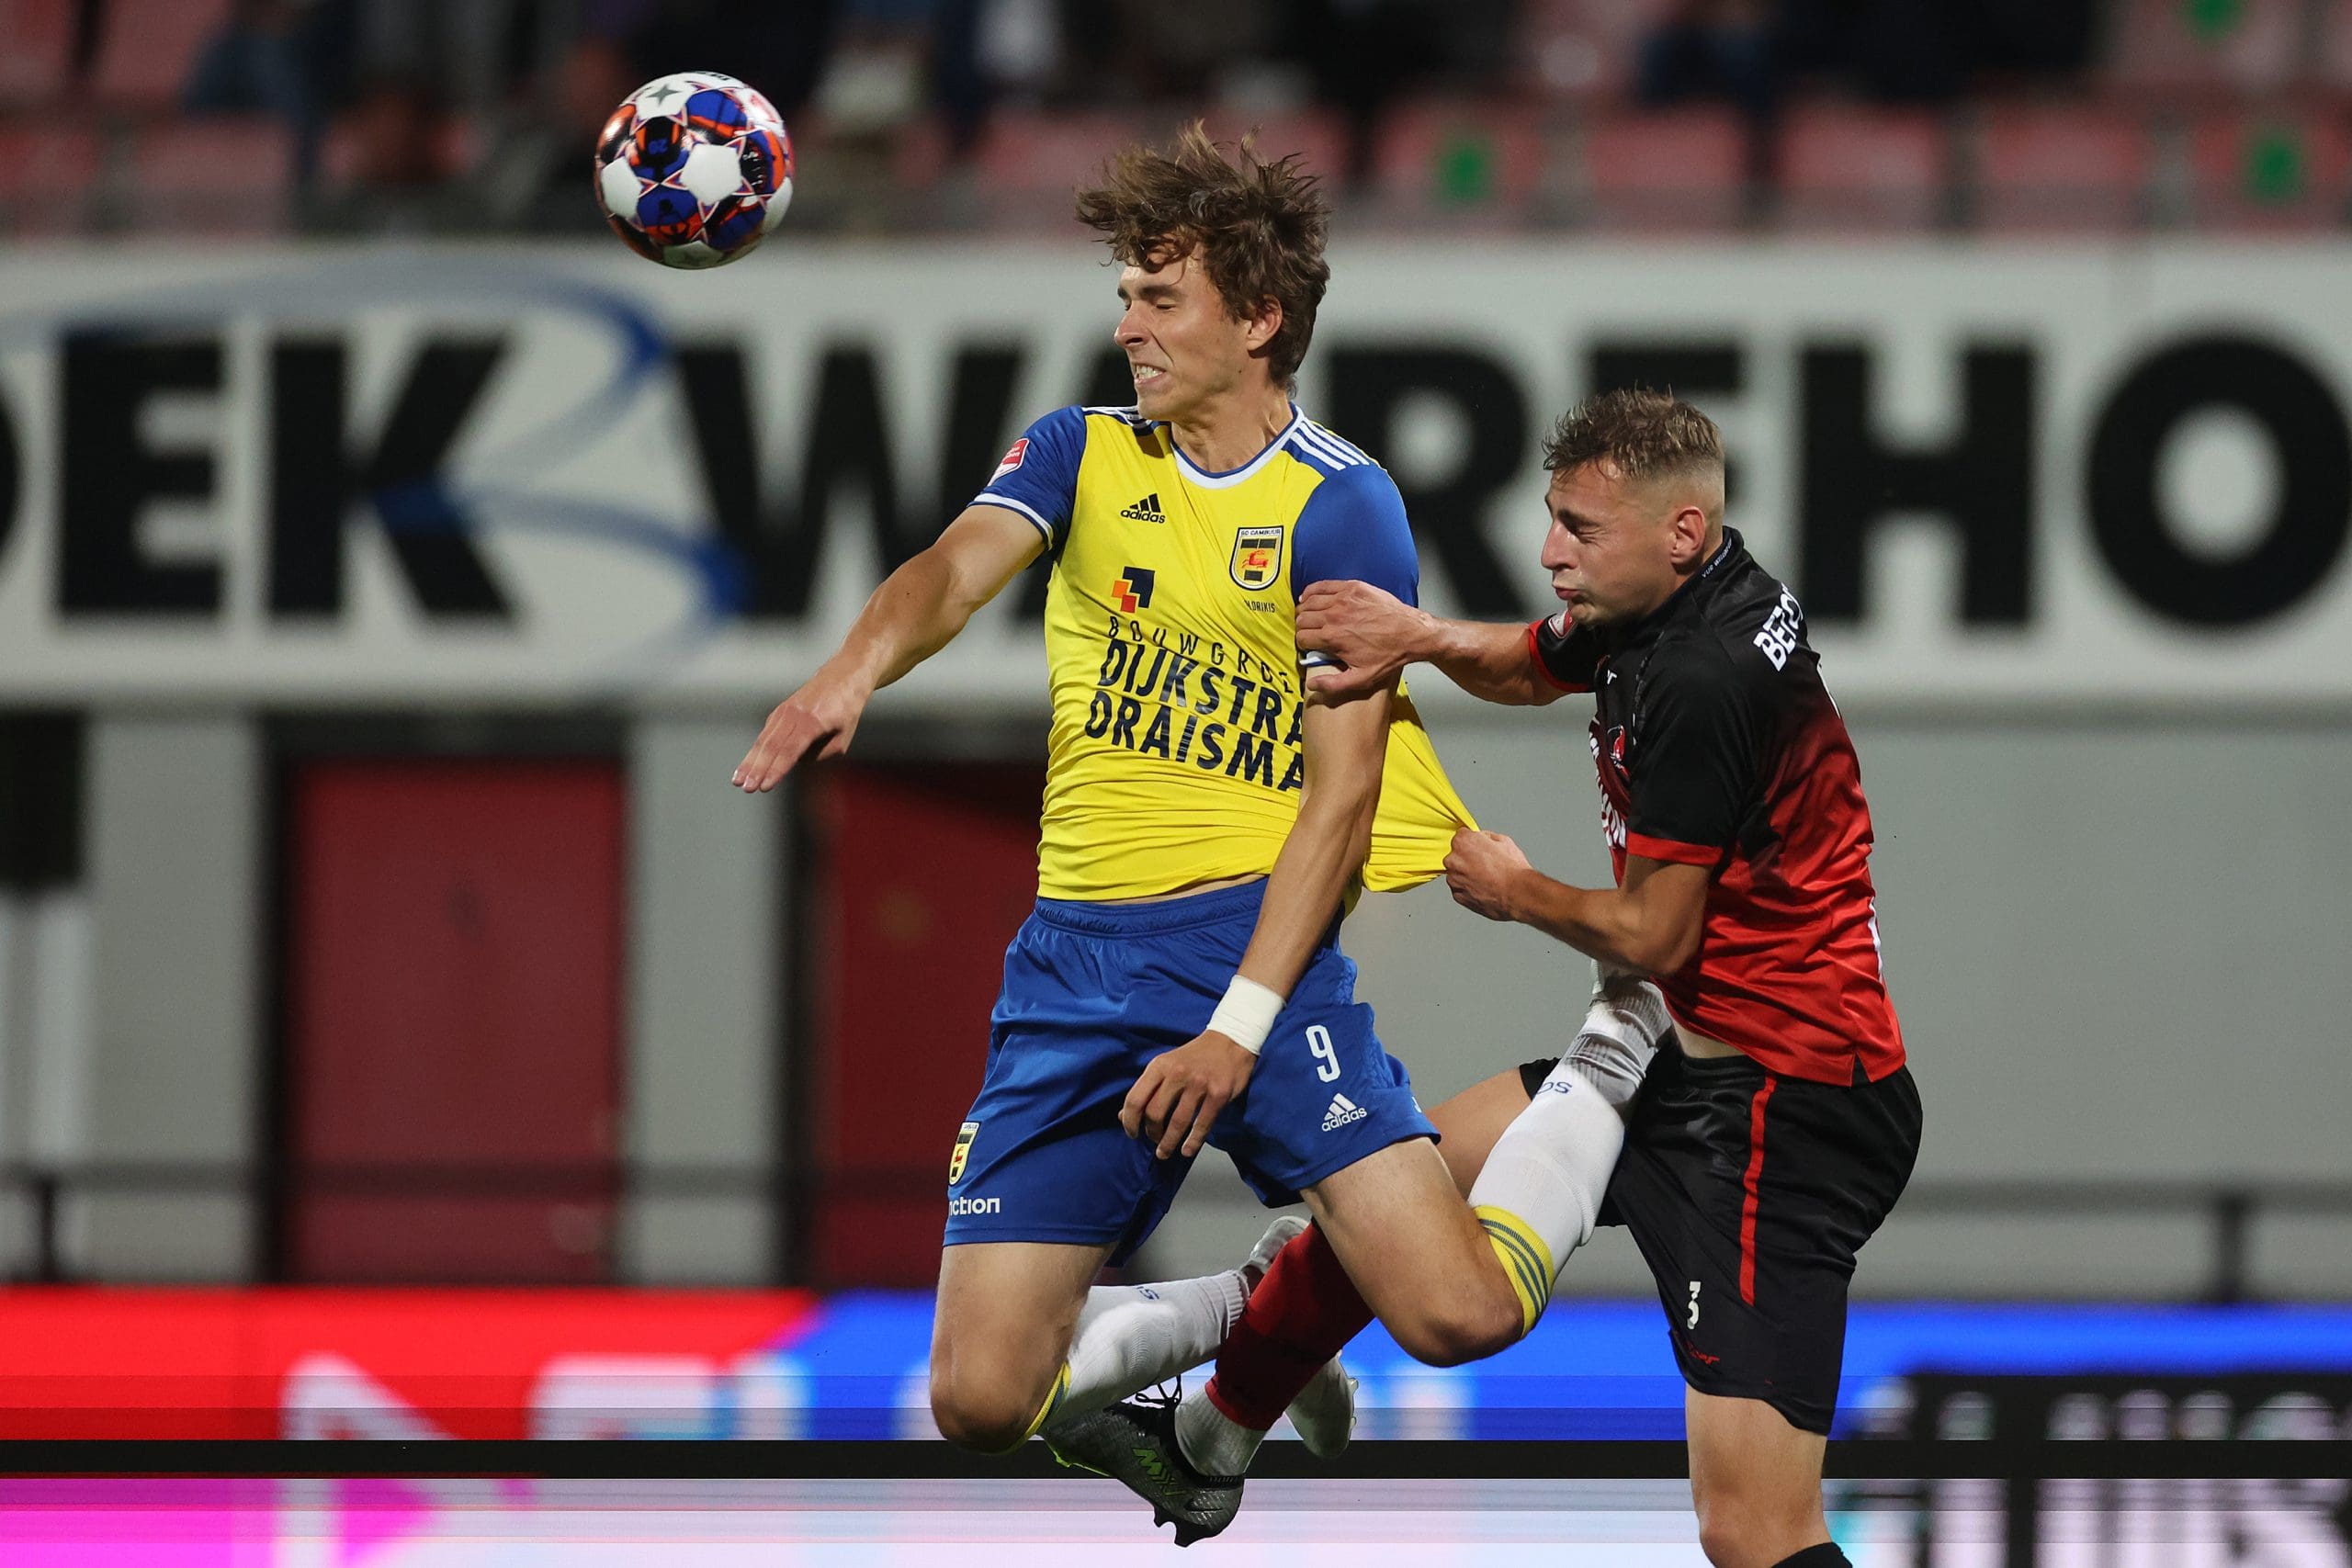 SC Cambuur crashed on the final stage in and against Helmond Sport